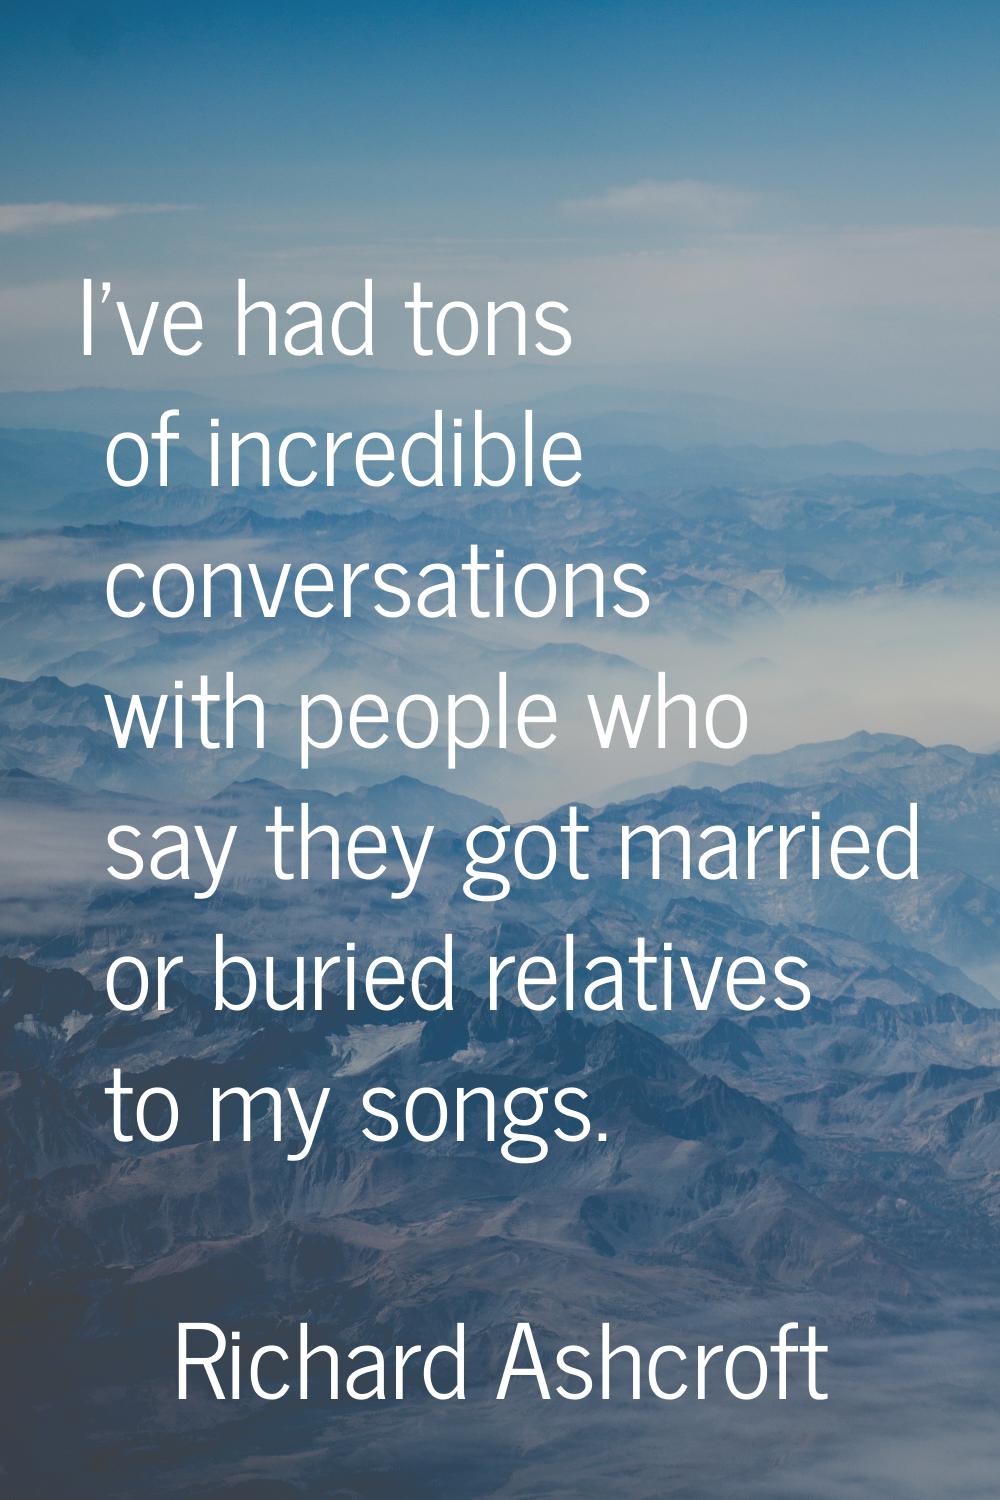 I've had tons of incredible conversations with people who say they got married or buried relatives 